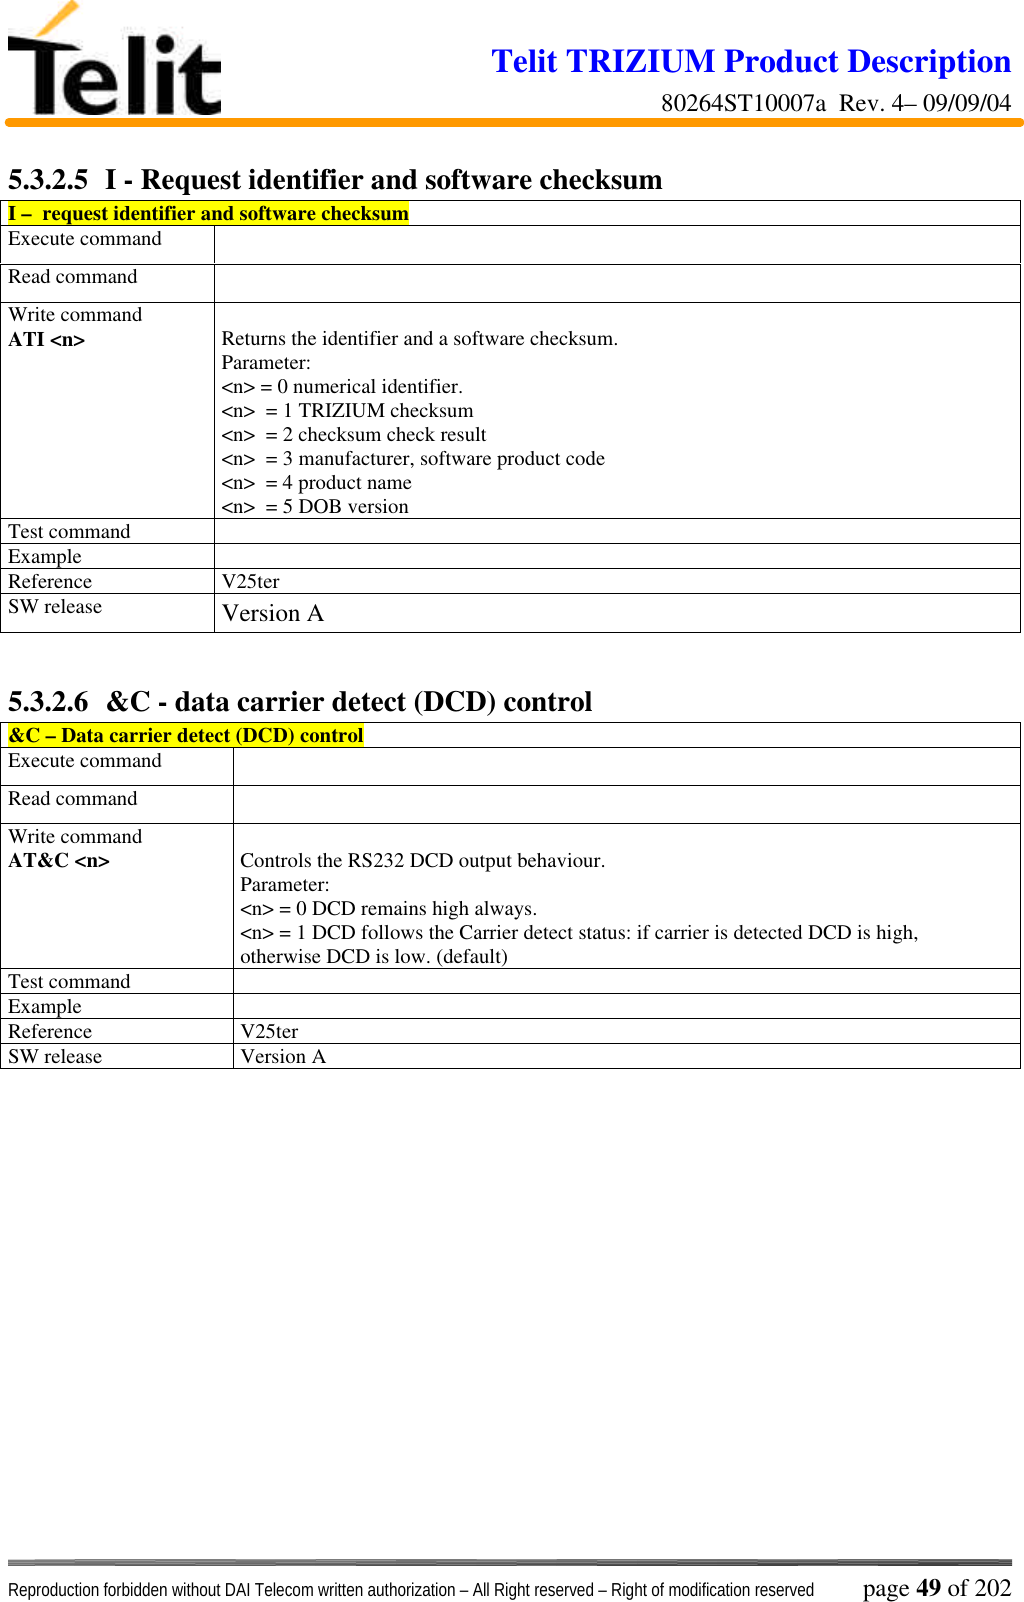 Telit TRIZIUM Product Description80264ST10007a  Rev. 4– 09/09/04Reproduction forbidden without DAI Telecom written authorization – All Right reserved – Right of modification reserved page 49 of 2025.3.2.5  I - Request identifier and software checksumI –  request identifier and software checksumExecute commandRead commandWrite commandATI &lt;n&gt; Returns the identifier and a software checksum.Parameter:&lt;n&gt; = 0 numerical identifier.&lt;n&gt;  = 1 TRIZIUM checksum&lt;n&gt;  = 2 checksum check result&lt;n&gt;  = 3 manufacturer, software product code&lt;n&gt;  = 4 product name&lt;n&gt;  = 5 DOB versionTest commandExampleReference V25terSW release Version A5.3.2.6  &amp;C - data carrier detect (DCD) control&amp;C – Data carrier detect (DCD) controlExecute commandRead commandWrite commandAT&amp;C &lt;n&gt; Controls the RS232 DCD output behaviour.Parameter:&lt;n&gt; = 0 DCD remains high always.&lt;n&gt; = 1 DCD follows the Carrier detect status: if carrier is detected DCD is high,otherwise DCD is low. (default)Test commandExampleReference V25terSW release Version A